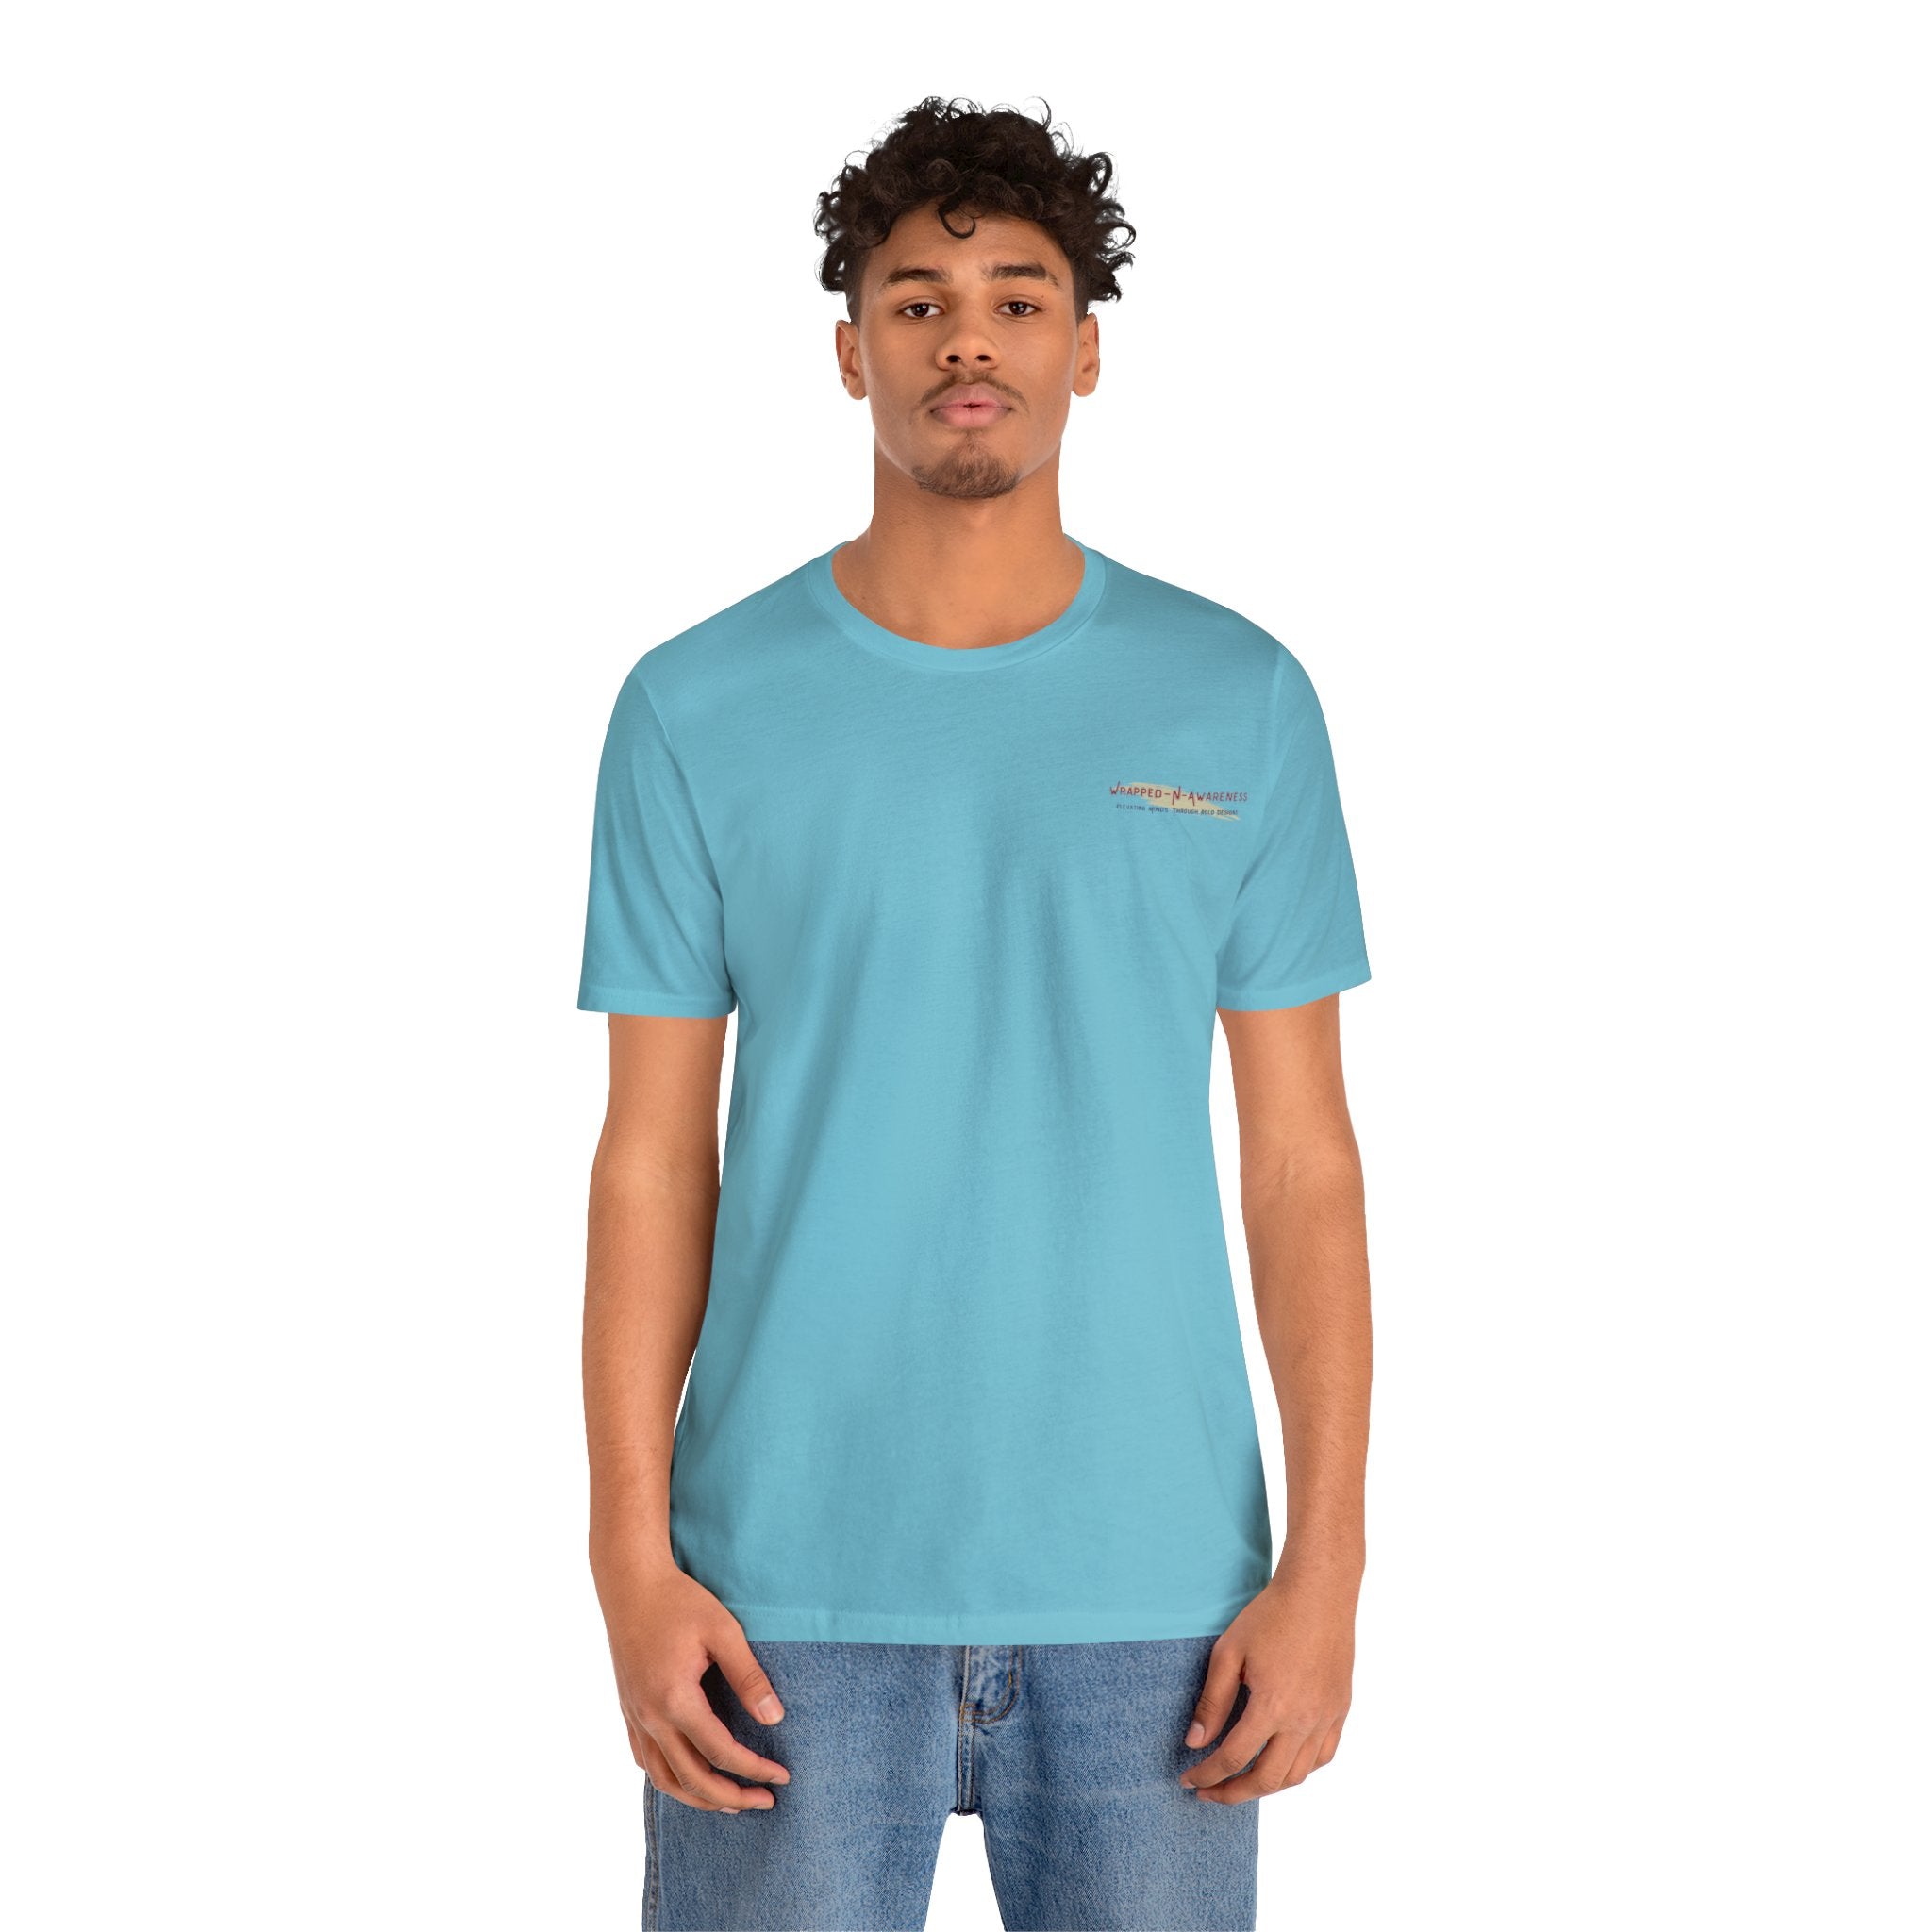 Hope Conquers Fear Jersey Tee - Bella+Canvas 3001 Heather Ice Blue Airlume Cotton Bella+Canvas 3001 Crew Neckline Jersey Short Sleeve Lightweight Fabric Mental Health Support Retail Fit Tear-away Label Tee Unisex Tee T-Shirt 4356304470207163475_2048 Printify